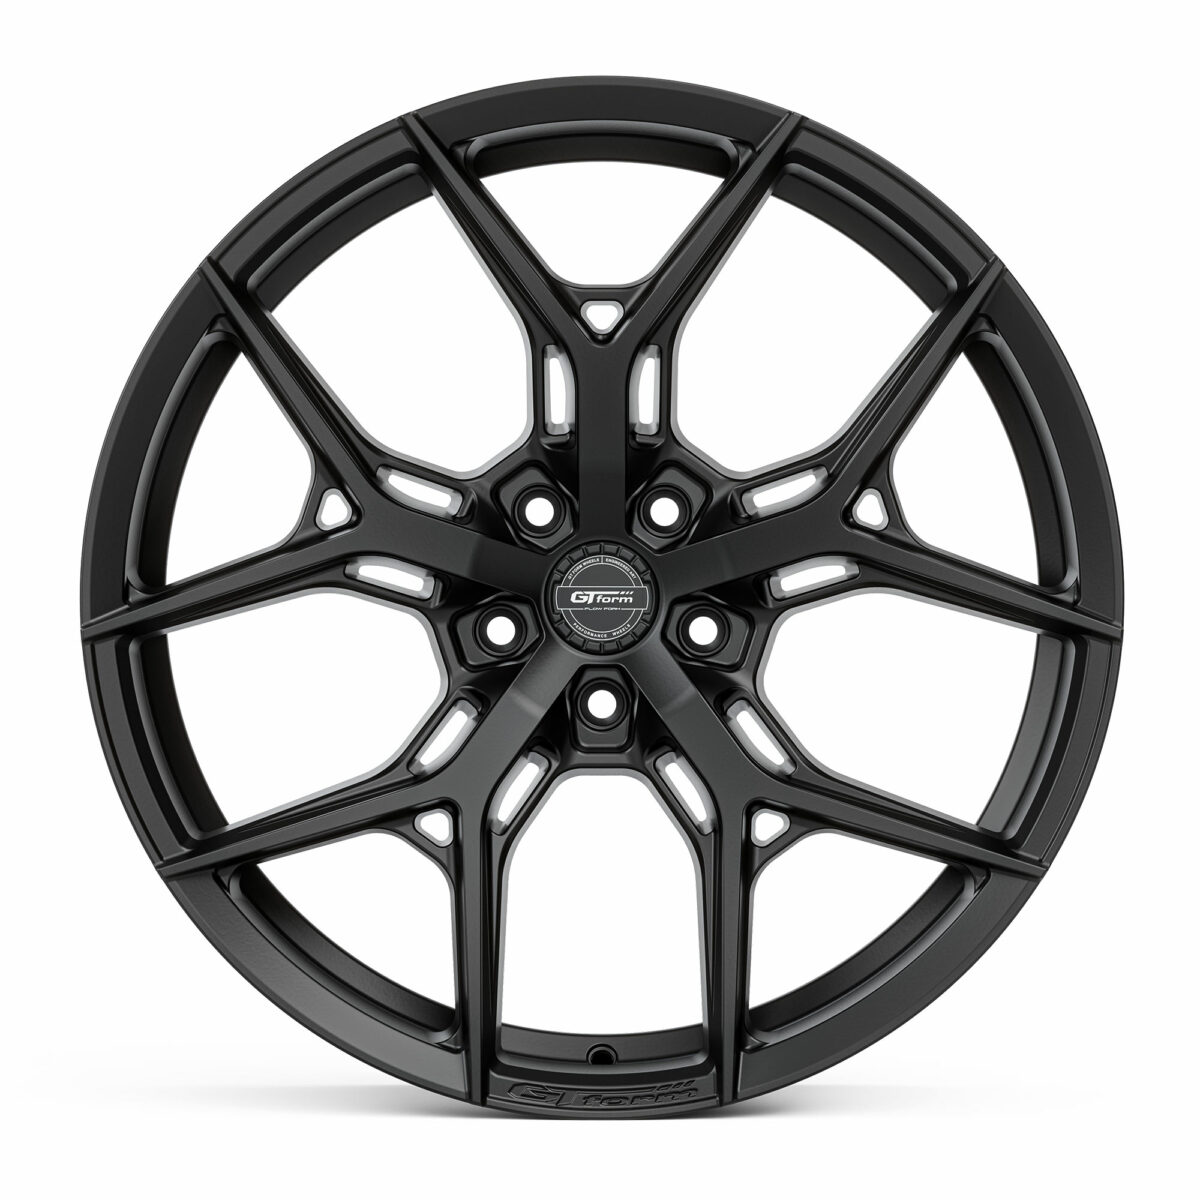 GT Form Torque Satin Black Staggered Rims 20 22 inch Performance Wheels